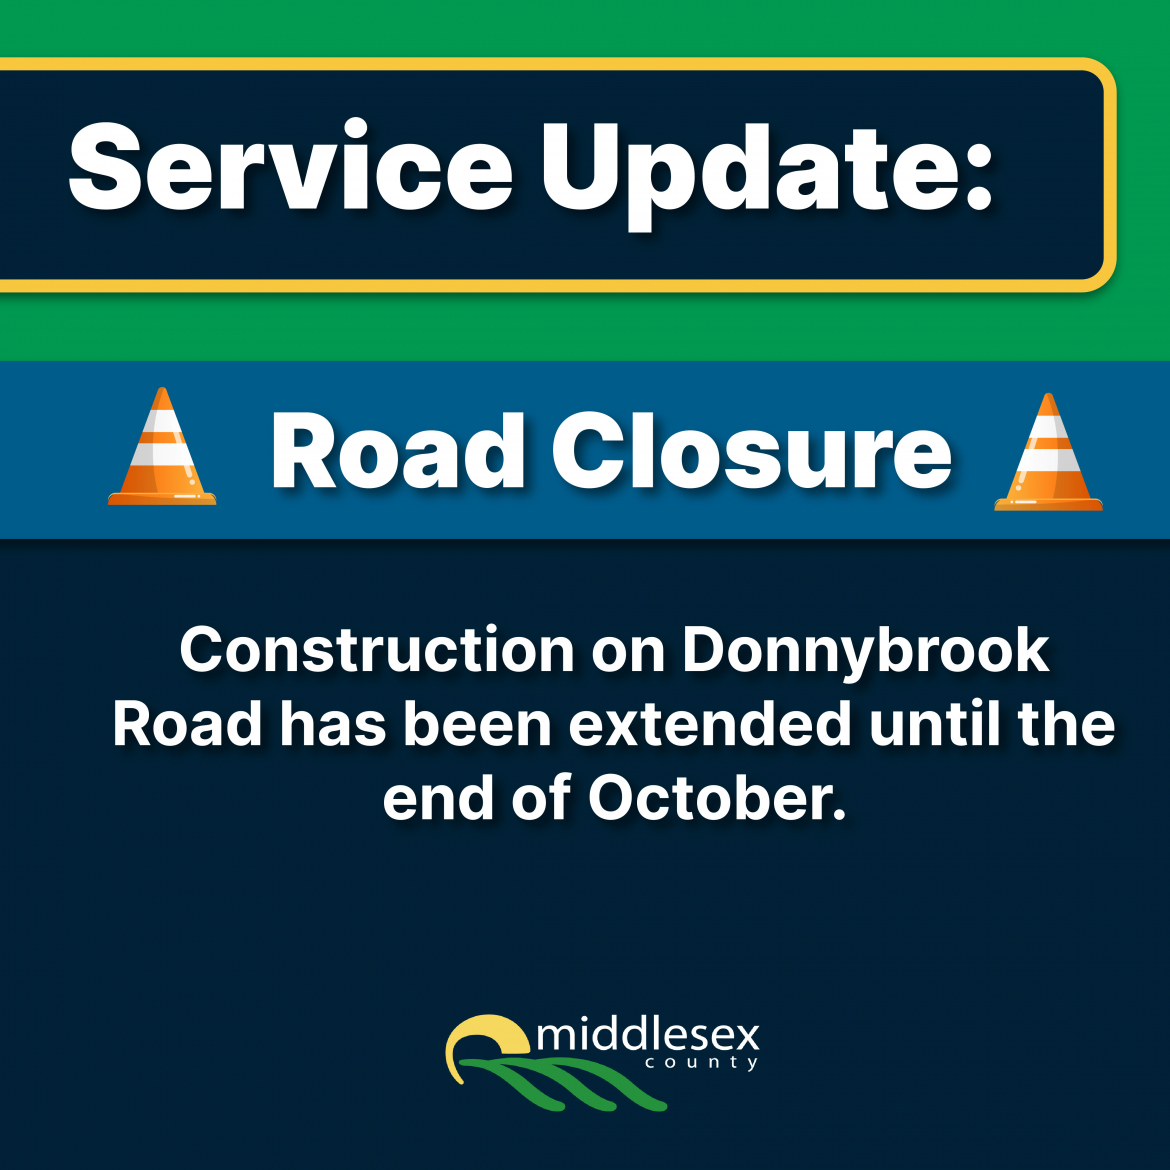 Road Closure Extension of Donnybrook 